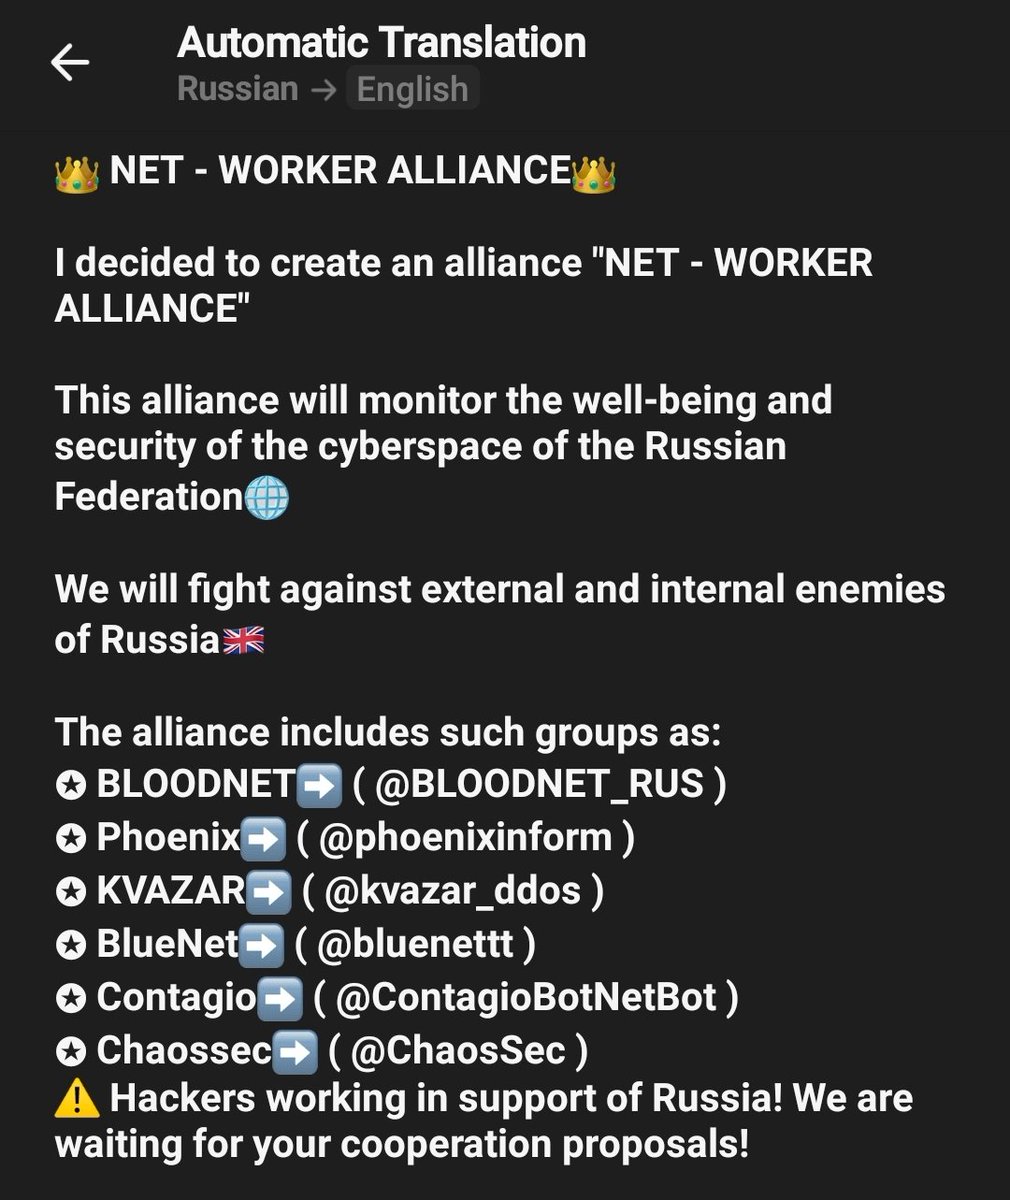 Net-worker has created and alliance similar to the several #killnet has created and recently #usersec has in recent months

#CyberSecurity #infosec #RussiaUkraineWar️ #UkraineRussianWar